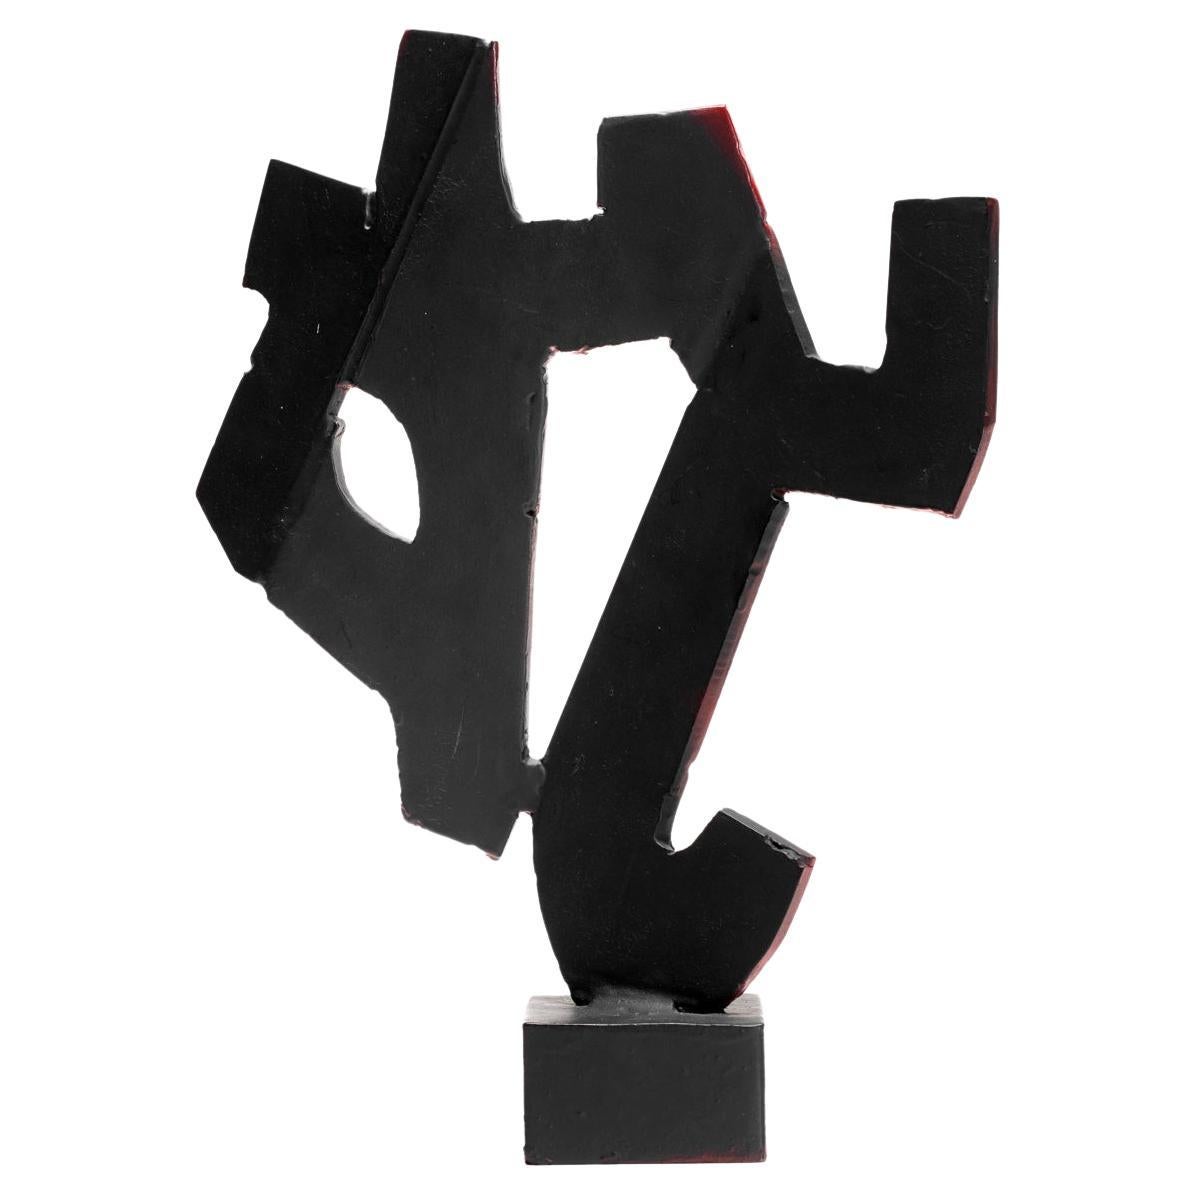 Tony Rosenthal Abstract Sculpture Blackened Steel Red Blushes For Sale